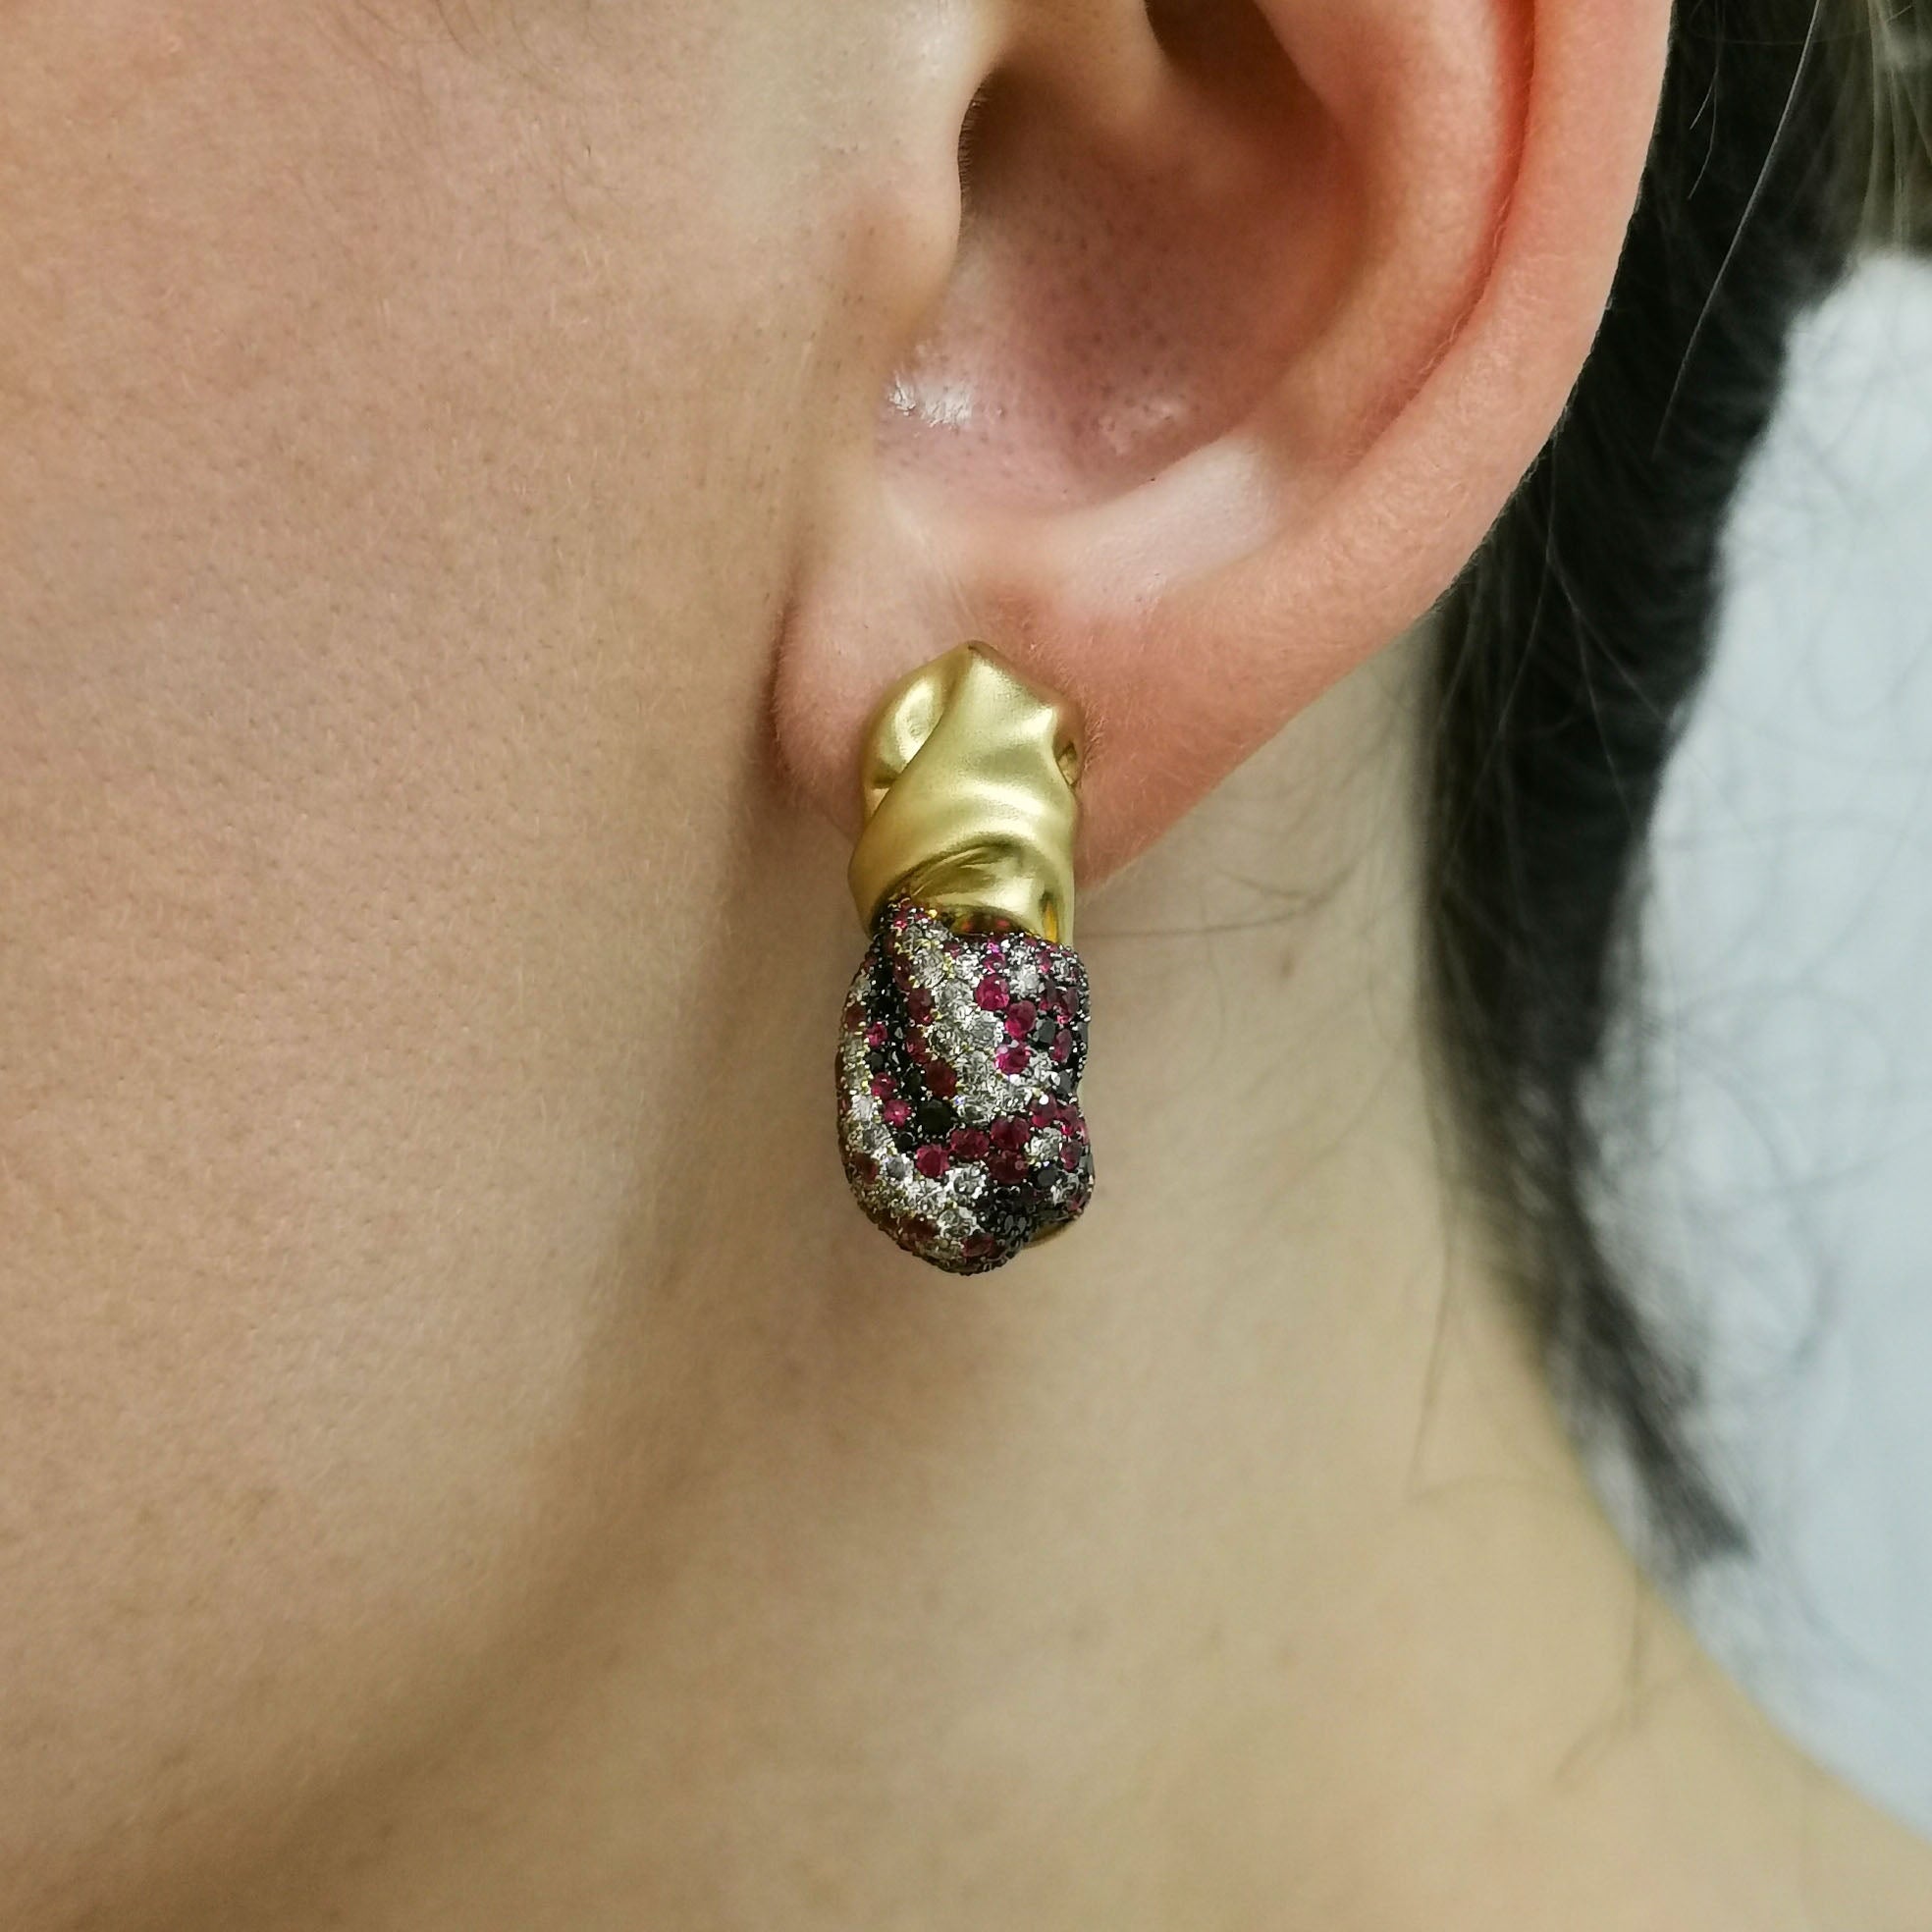 E 0132-5, 18K Yellow Gold, Ruby, Champagne and Black Diamonds Earrings